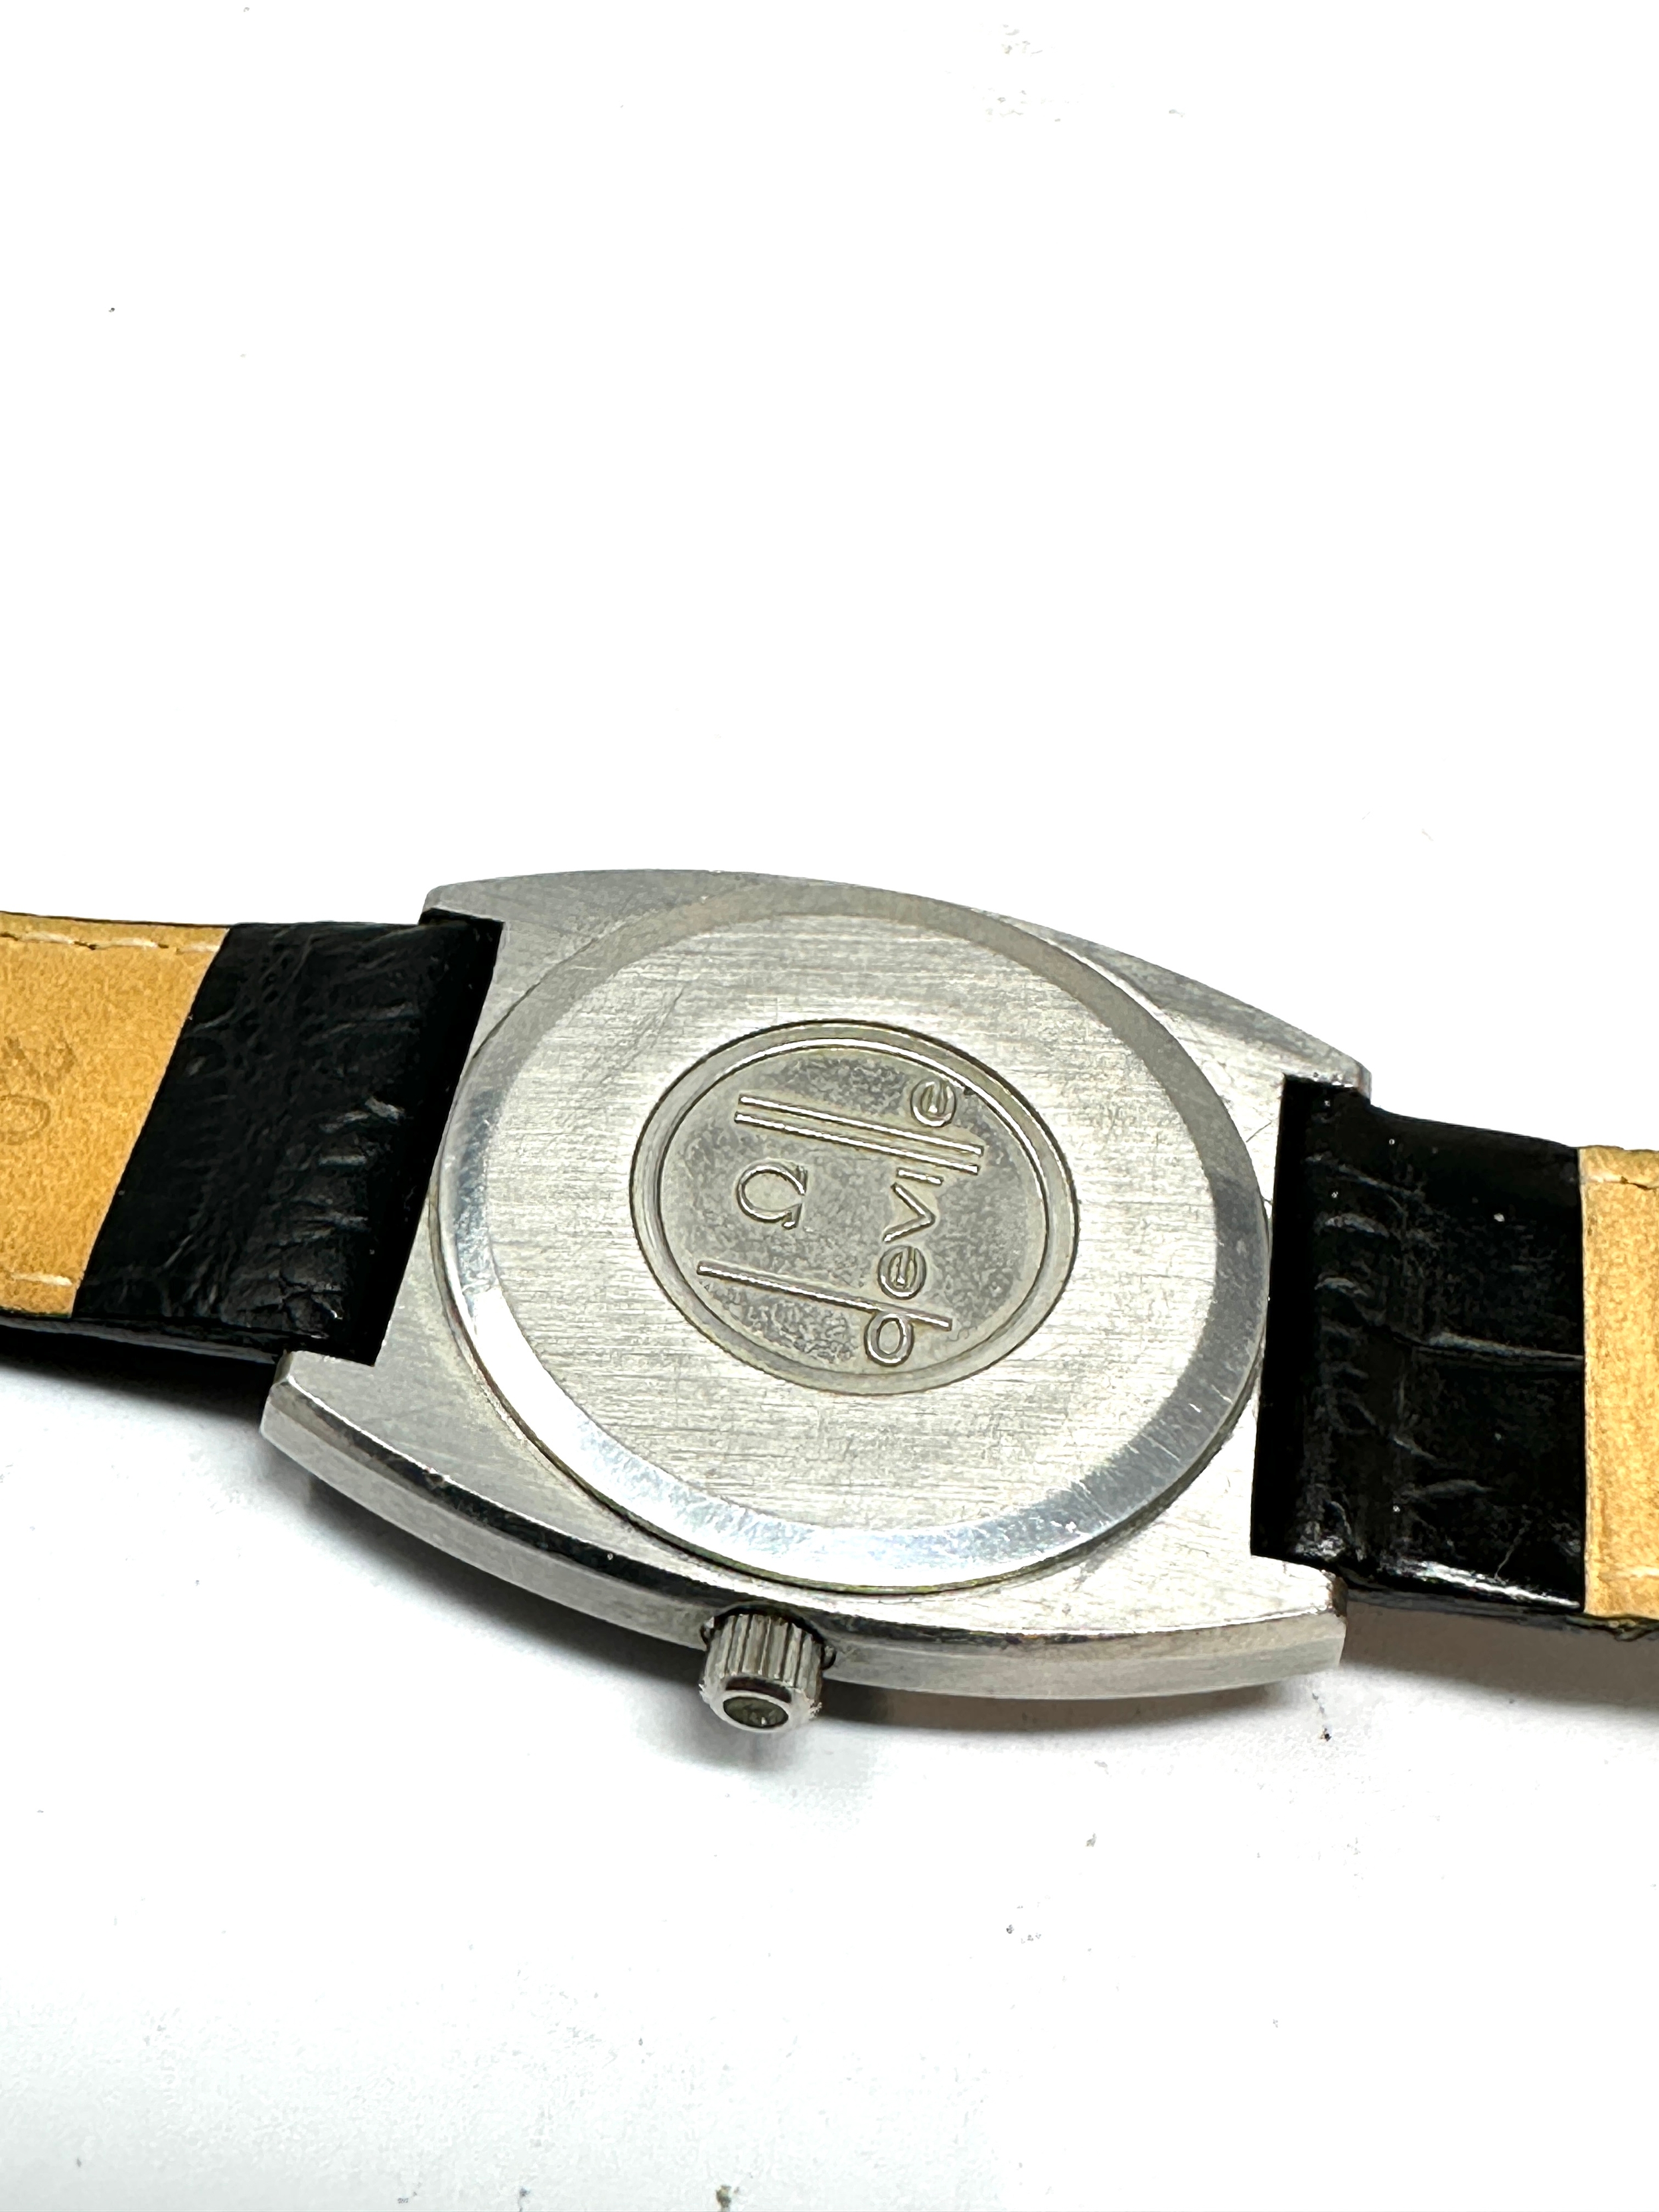 Vintage Gents Omega quartz Deville wrist watch the watch is not ticking possibly needs replacement - Image 3 of 3